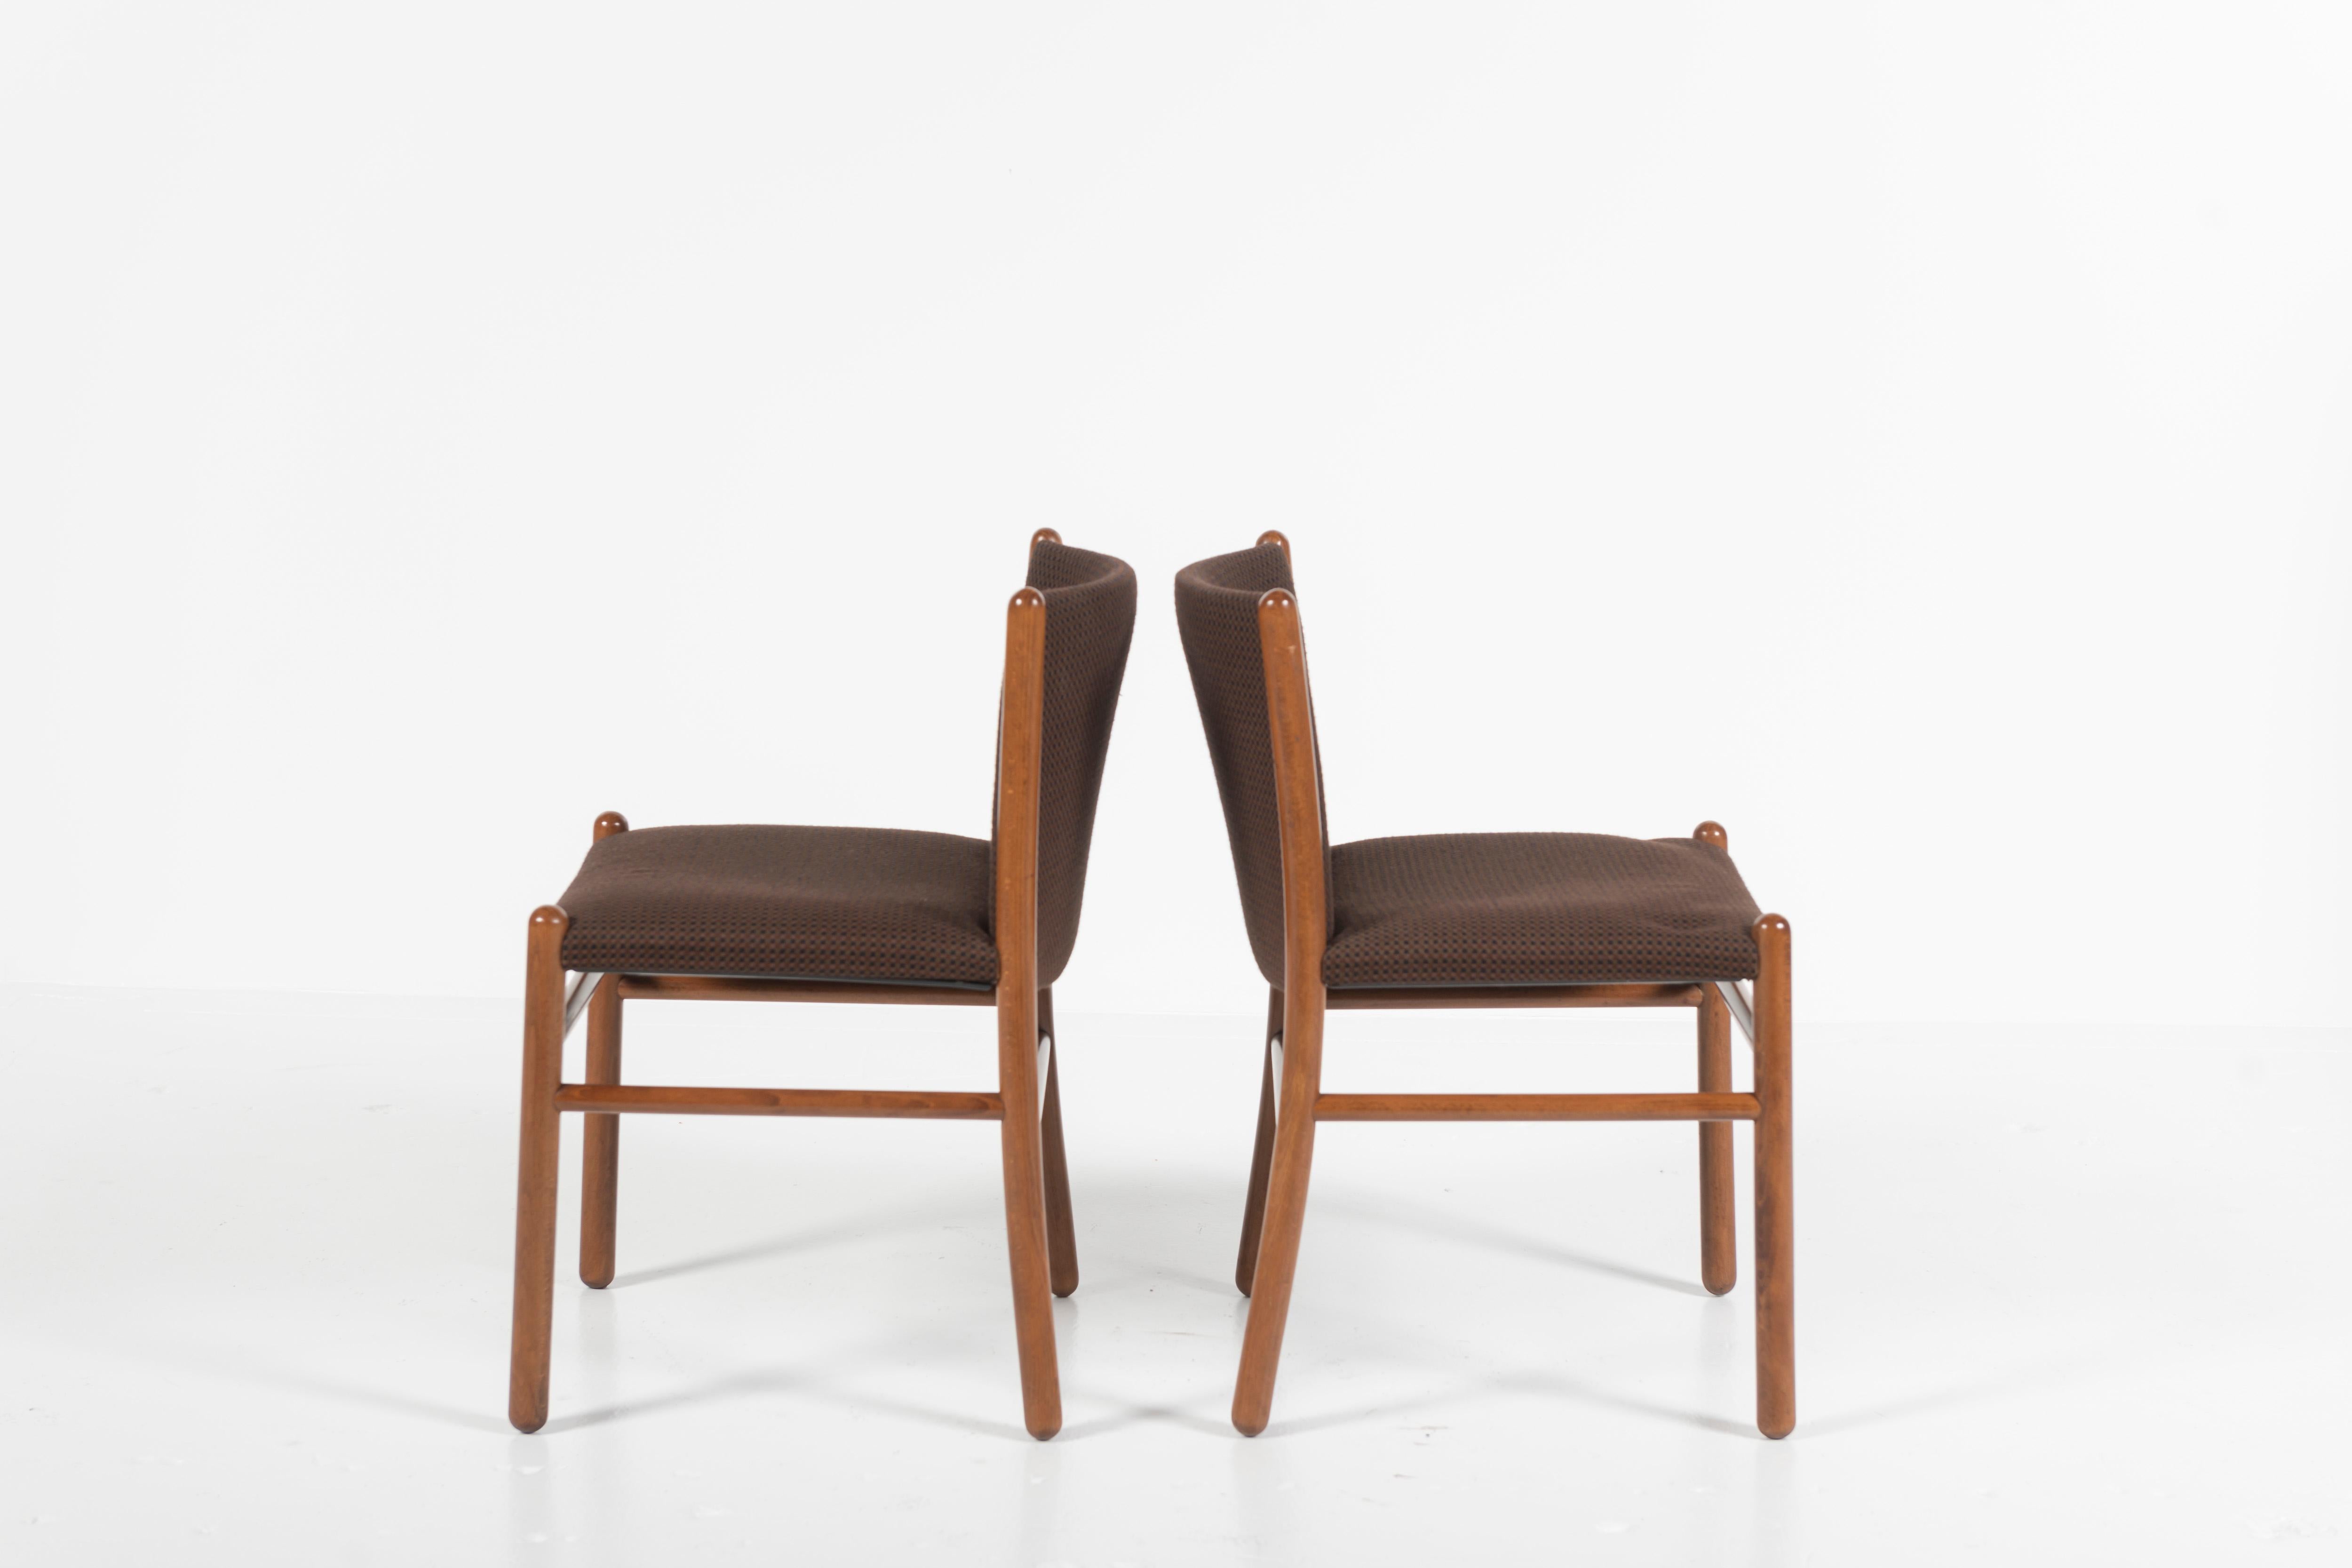 Set of Four Mid-Century Modern Dining Chairs, Gianfranco Frattini, Italy, 1960s For Sale 3